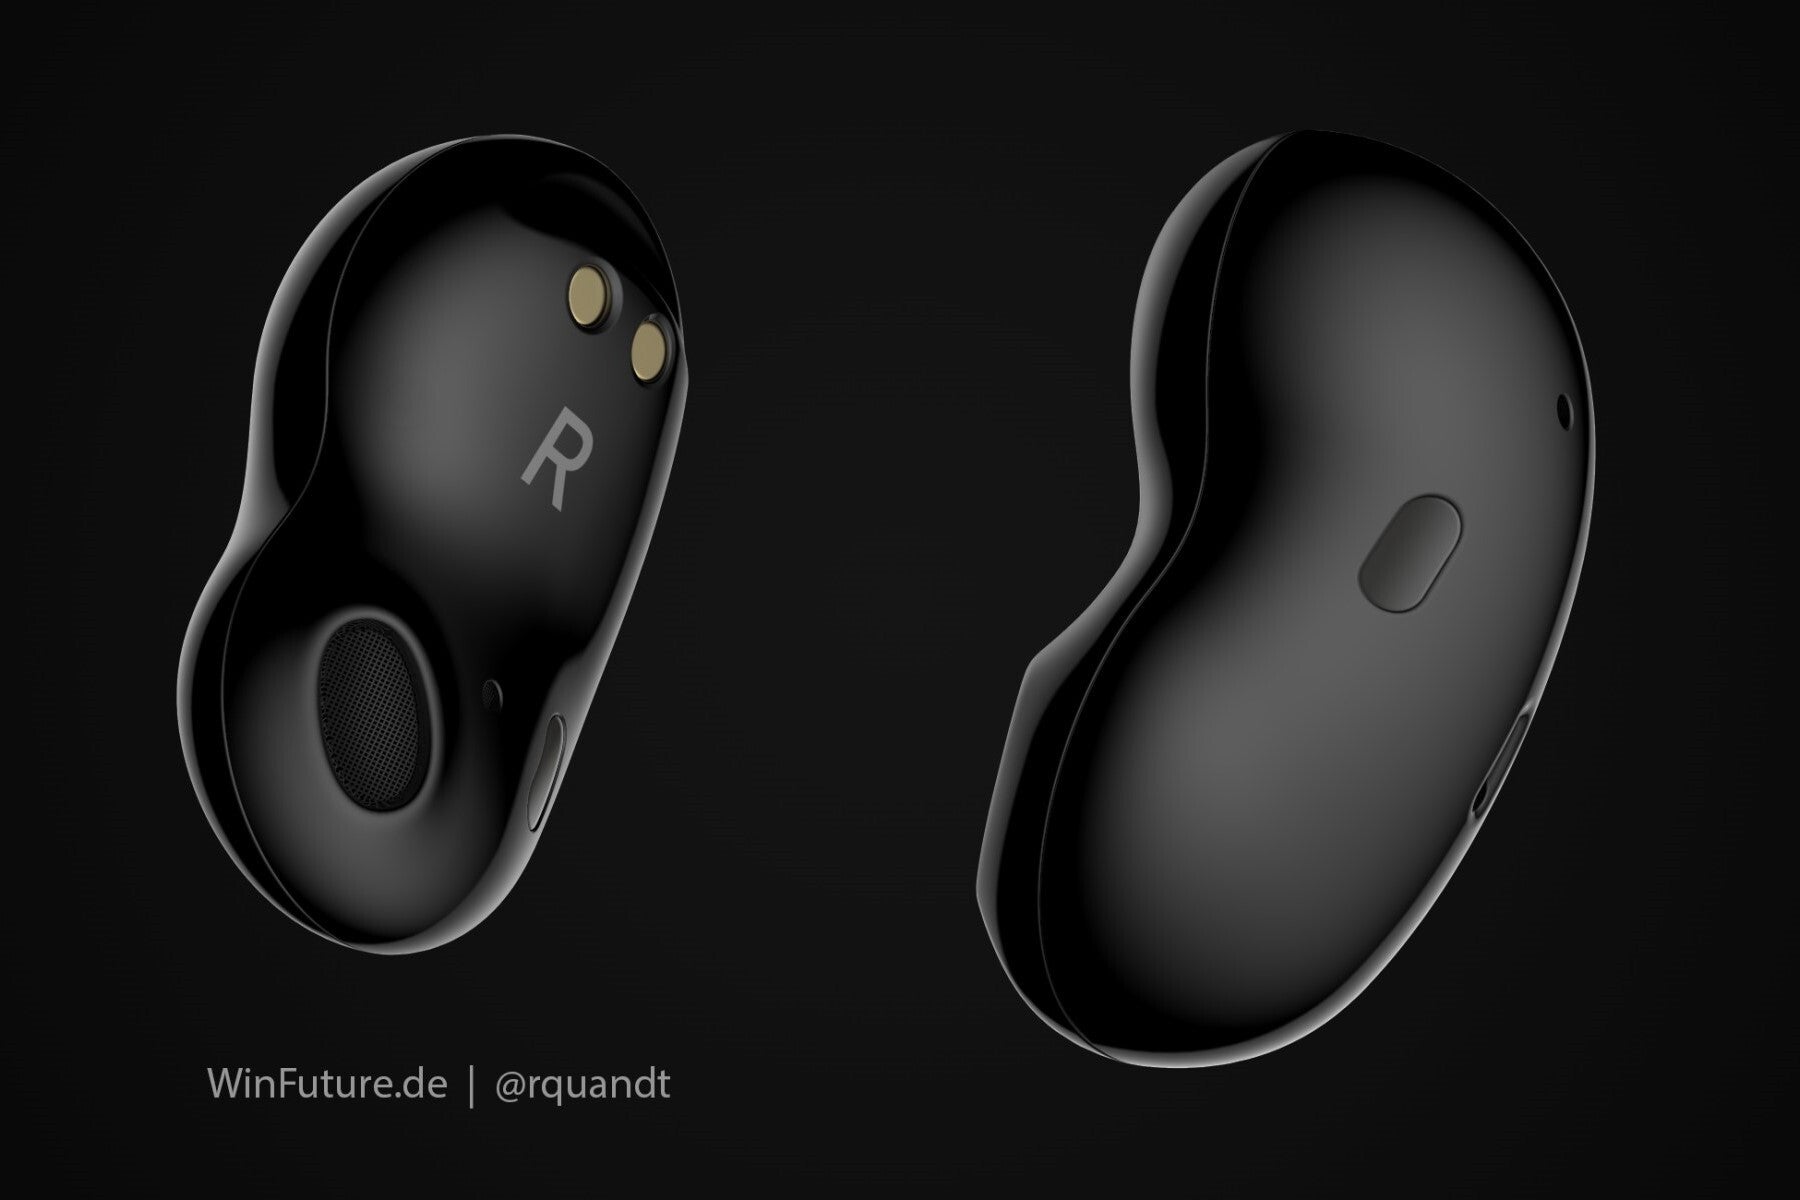 Samsung Galaxy Buds Bean render based on 3D data - Next-gen Galaxy Buds to offer active noise cancellation for less than $150